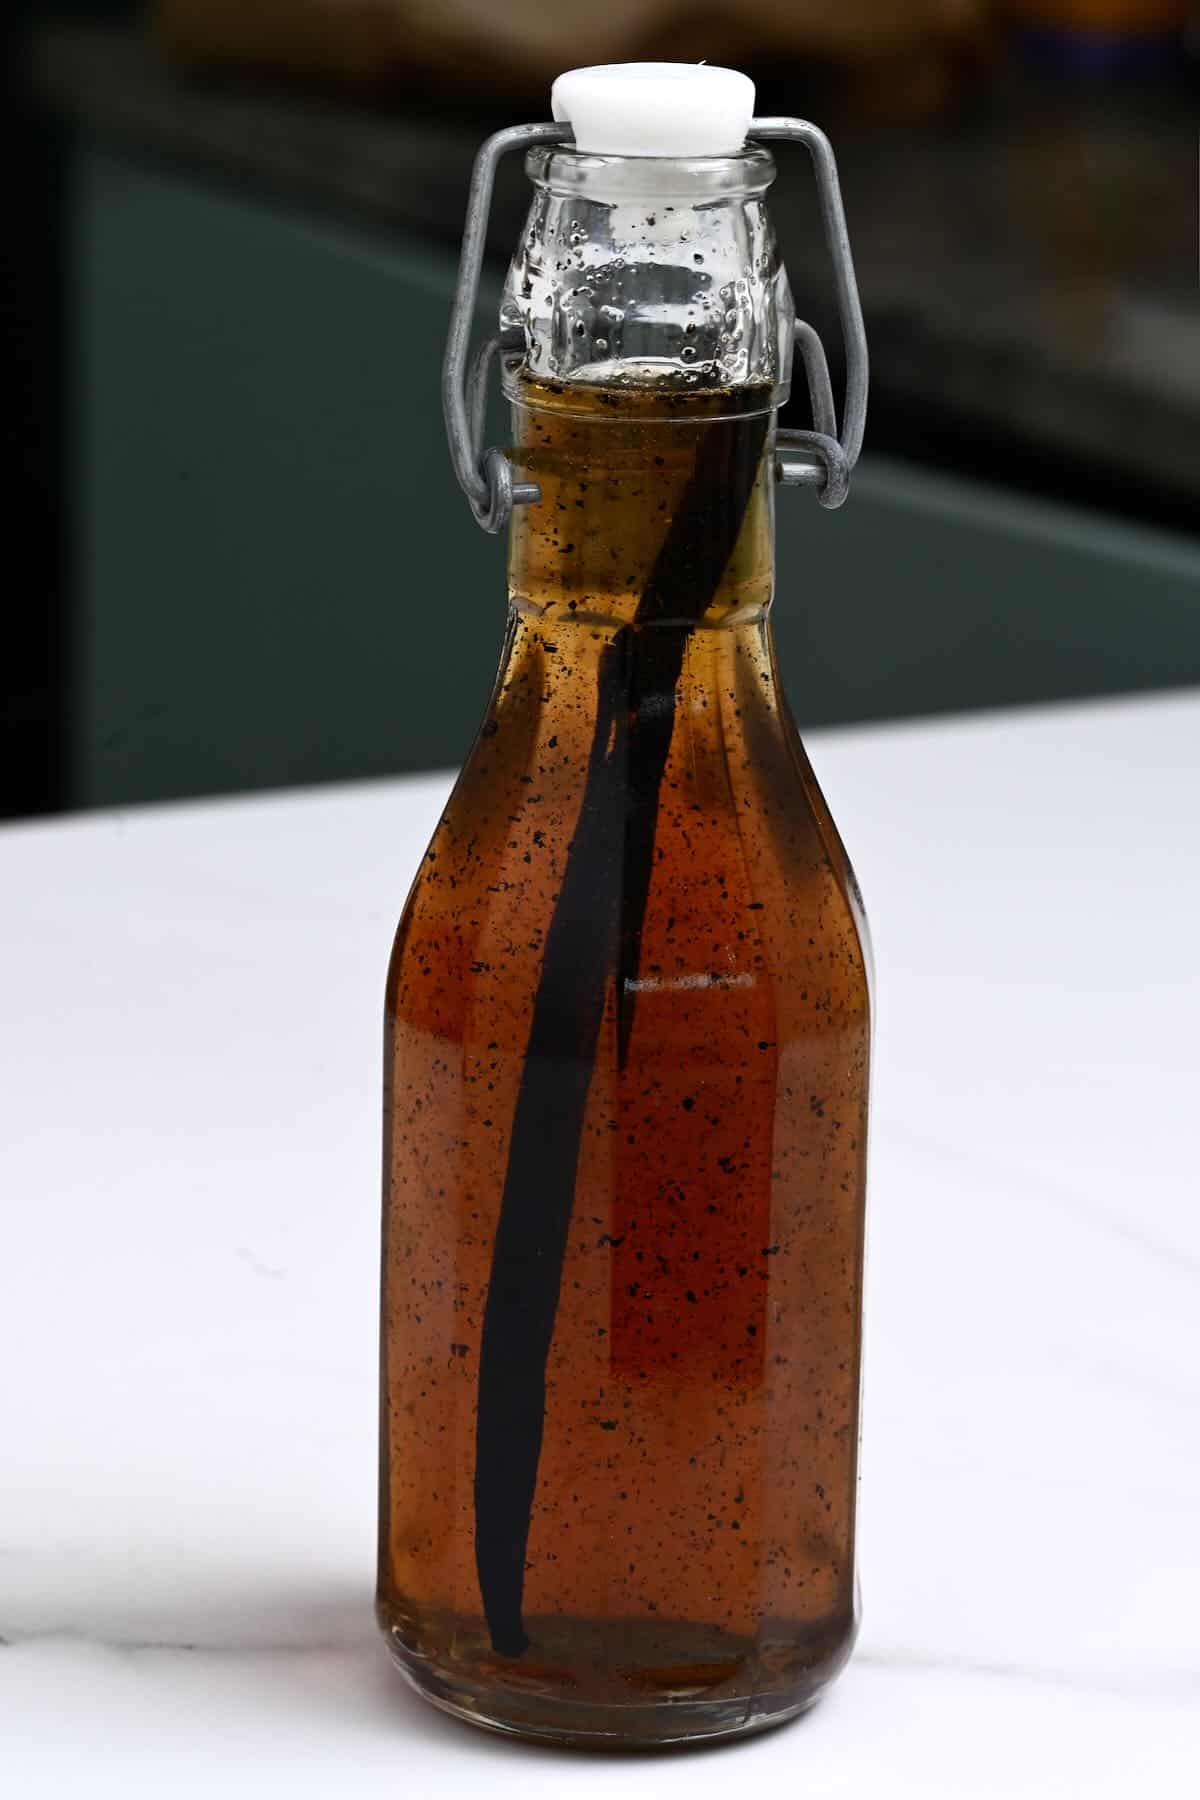 Sugar syrup with vanilla in a bottle